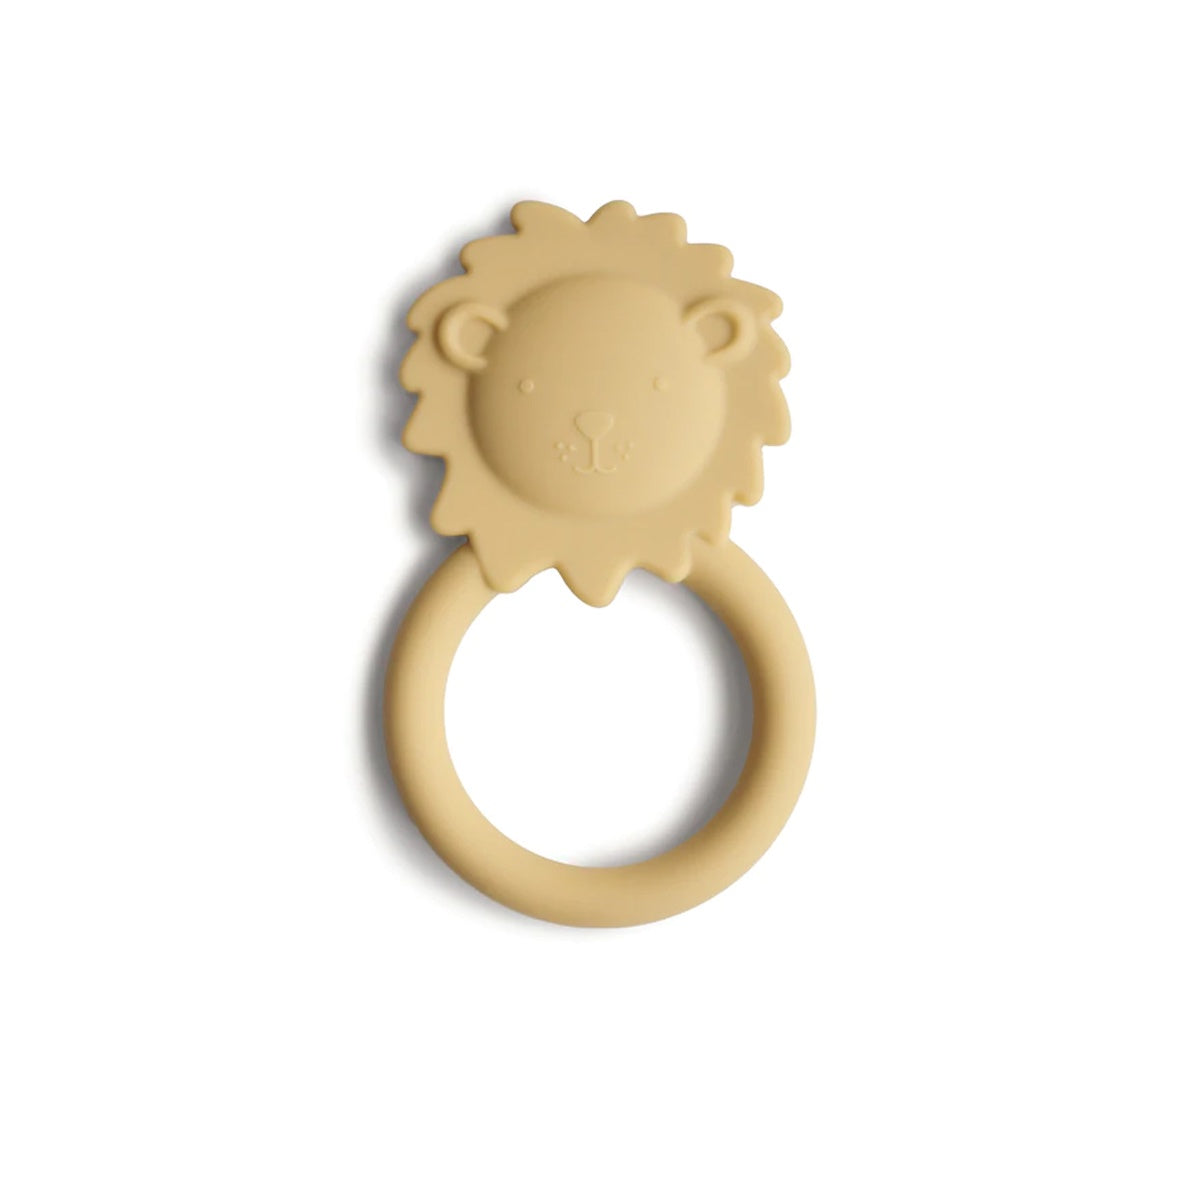 Mushie Lion Teether - Soft Yellow